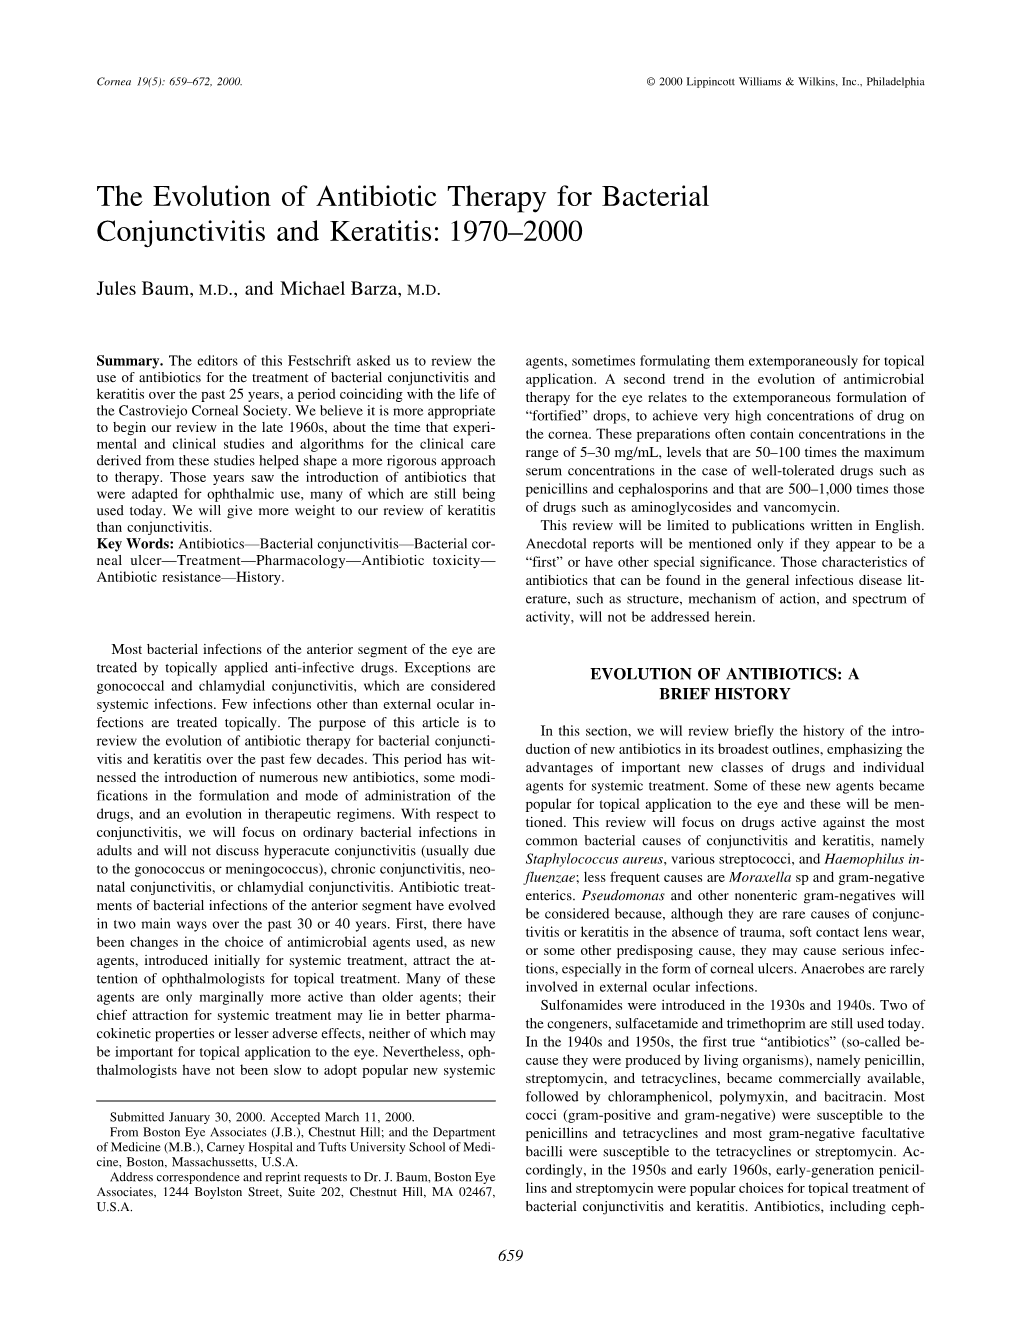 The Evolution of Antibiotic Therapy for Bacterial Conjunctivitis and Keratitis: 1970–2000